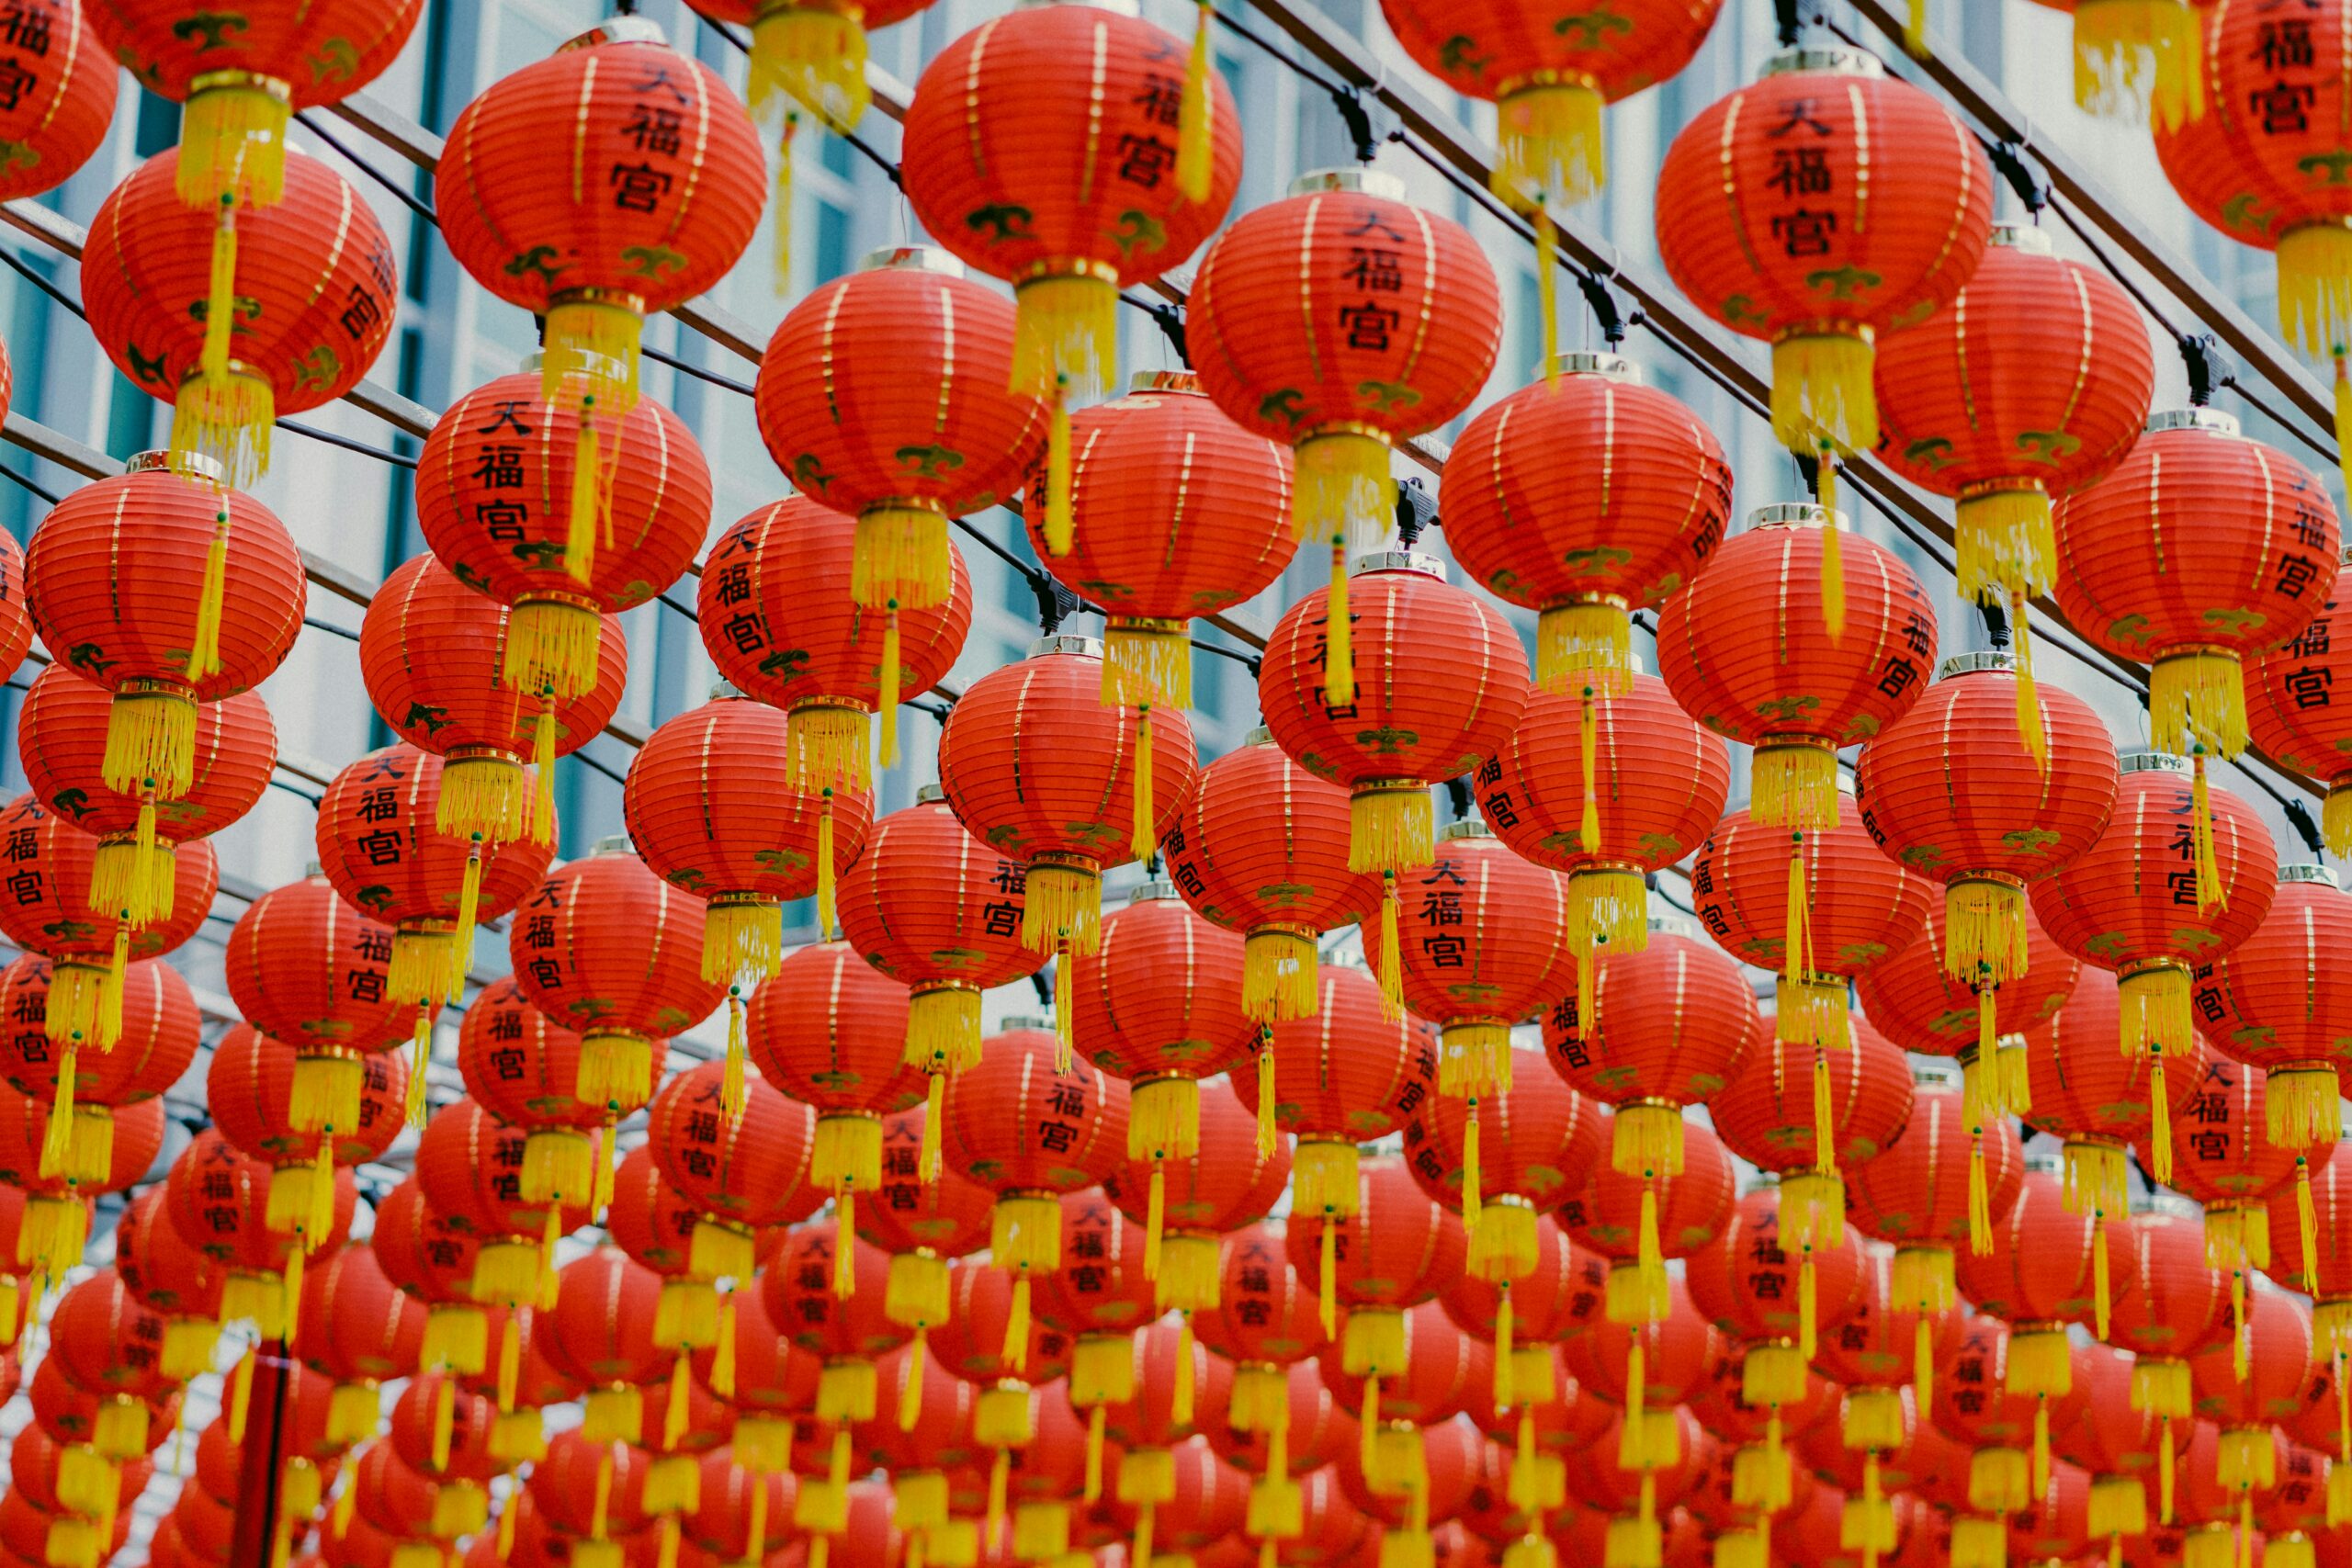 A row of red Chinese Lunar New Year lanterns